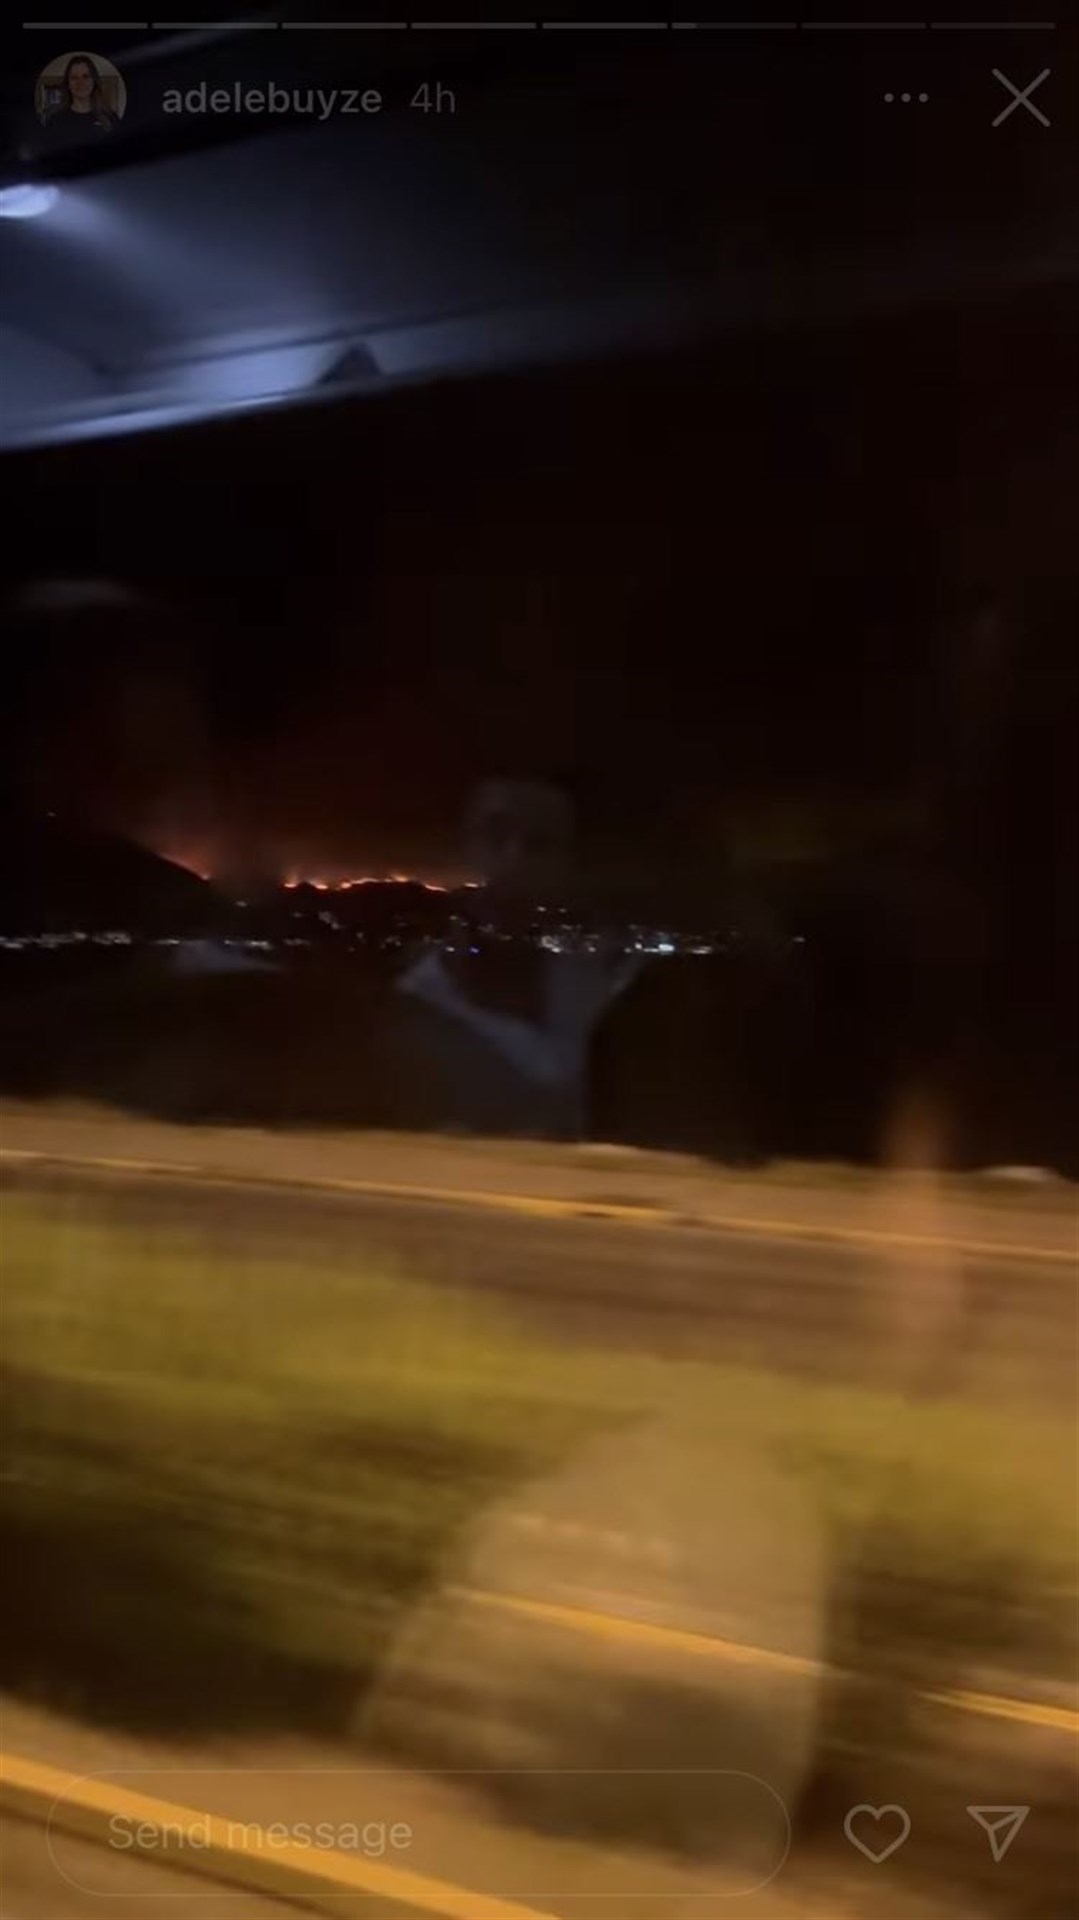 A line of flames on the hillside, as photographed from the bus during evacuation